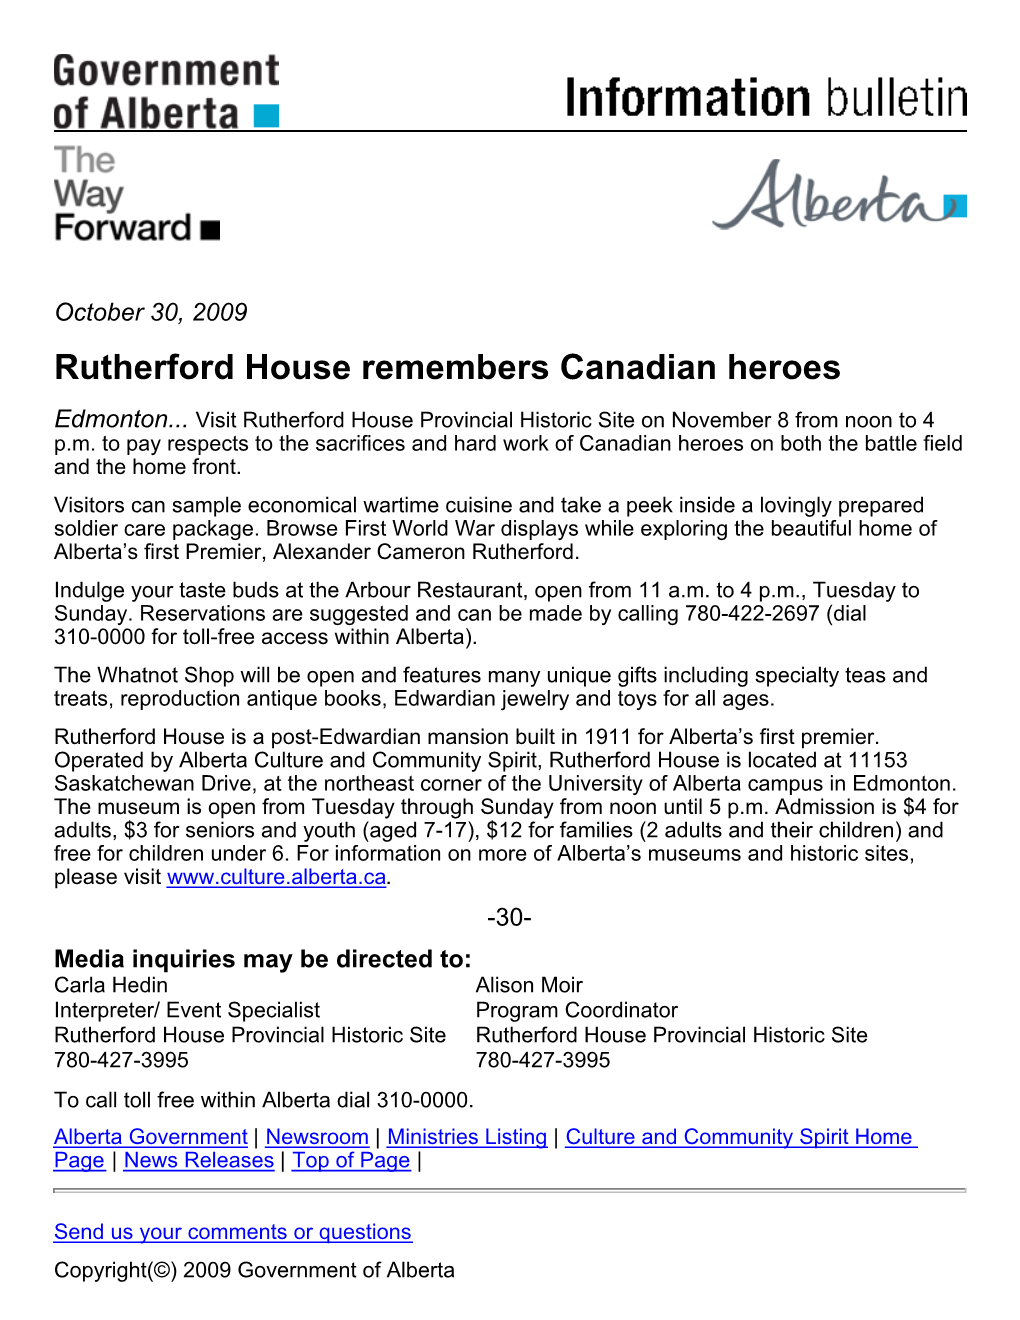 Rutherford House Remembers Canadian Heroes